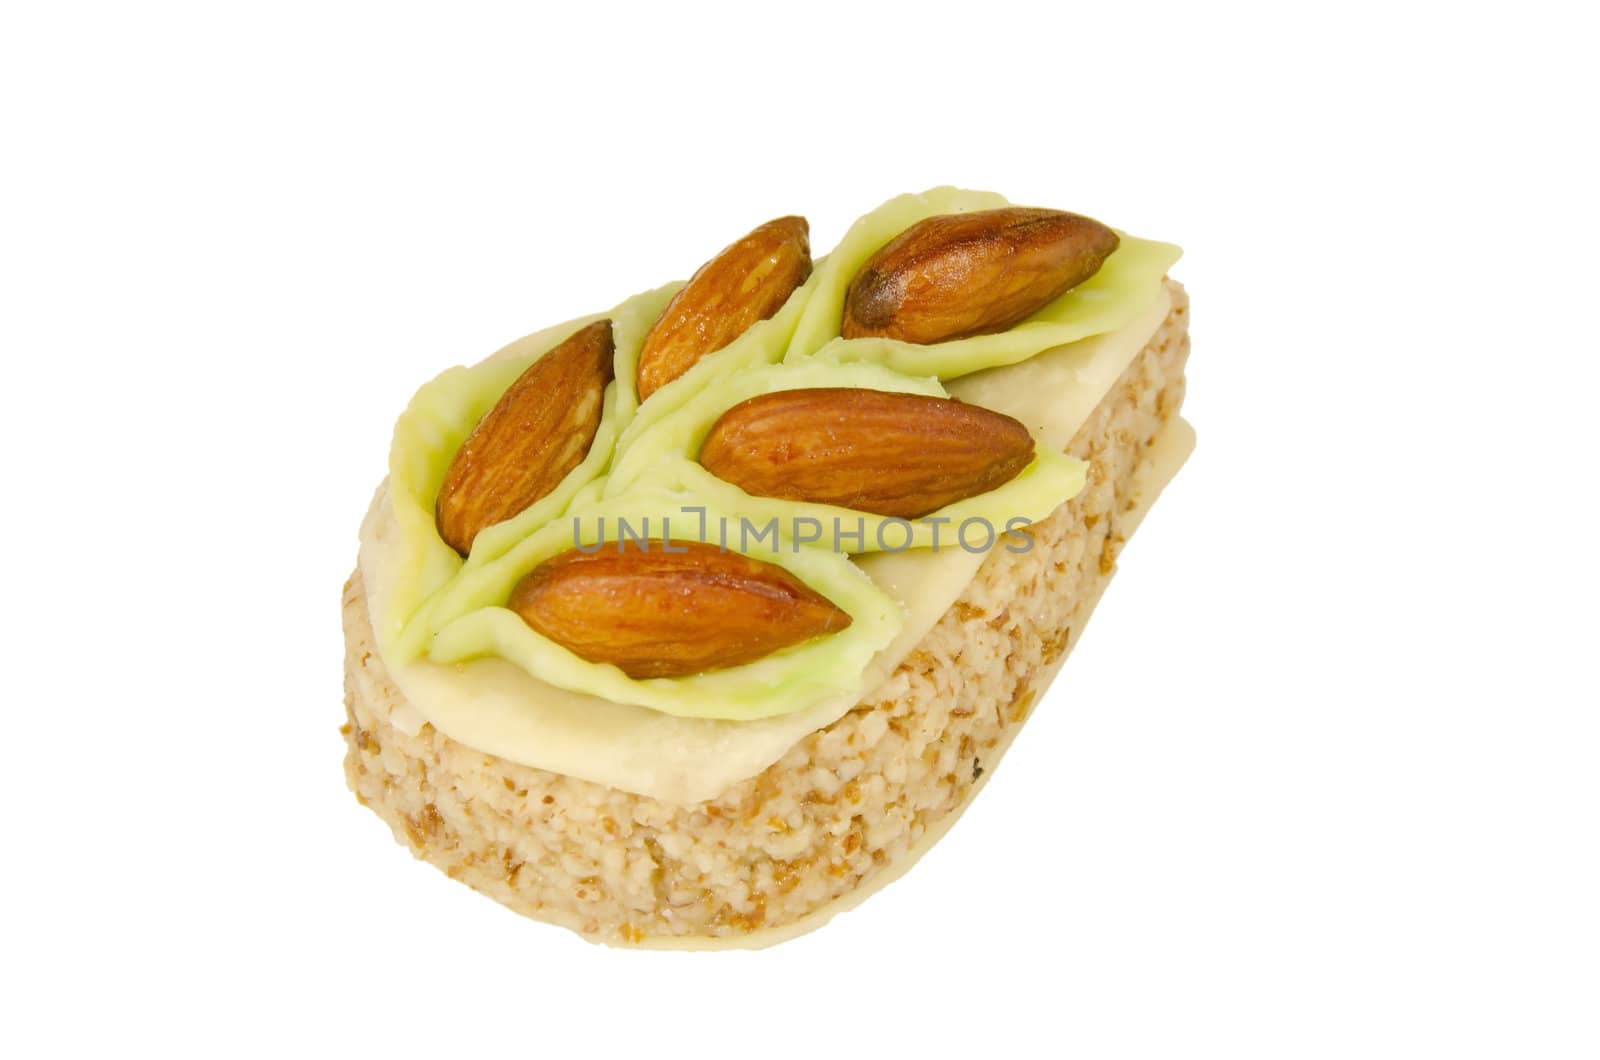 pastry ornamented with almonds isolated on a white background